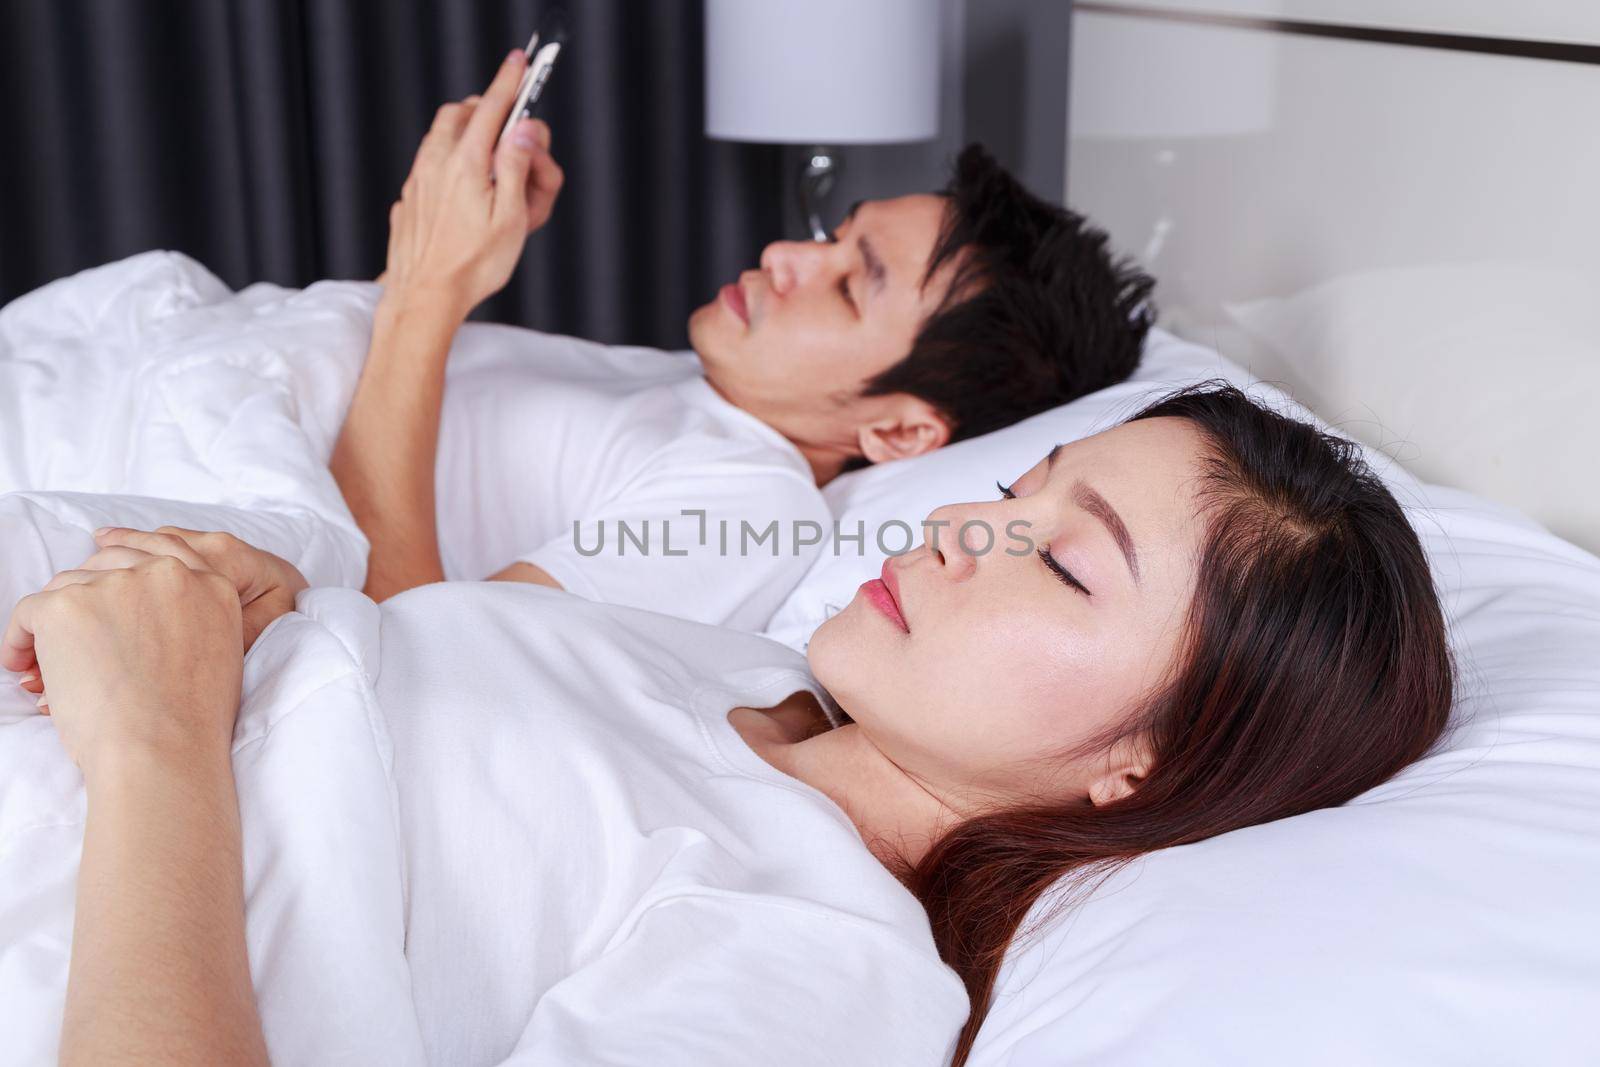 woman in bed with her sleeping and her husband texting on smartphone in bedroom by geargodz